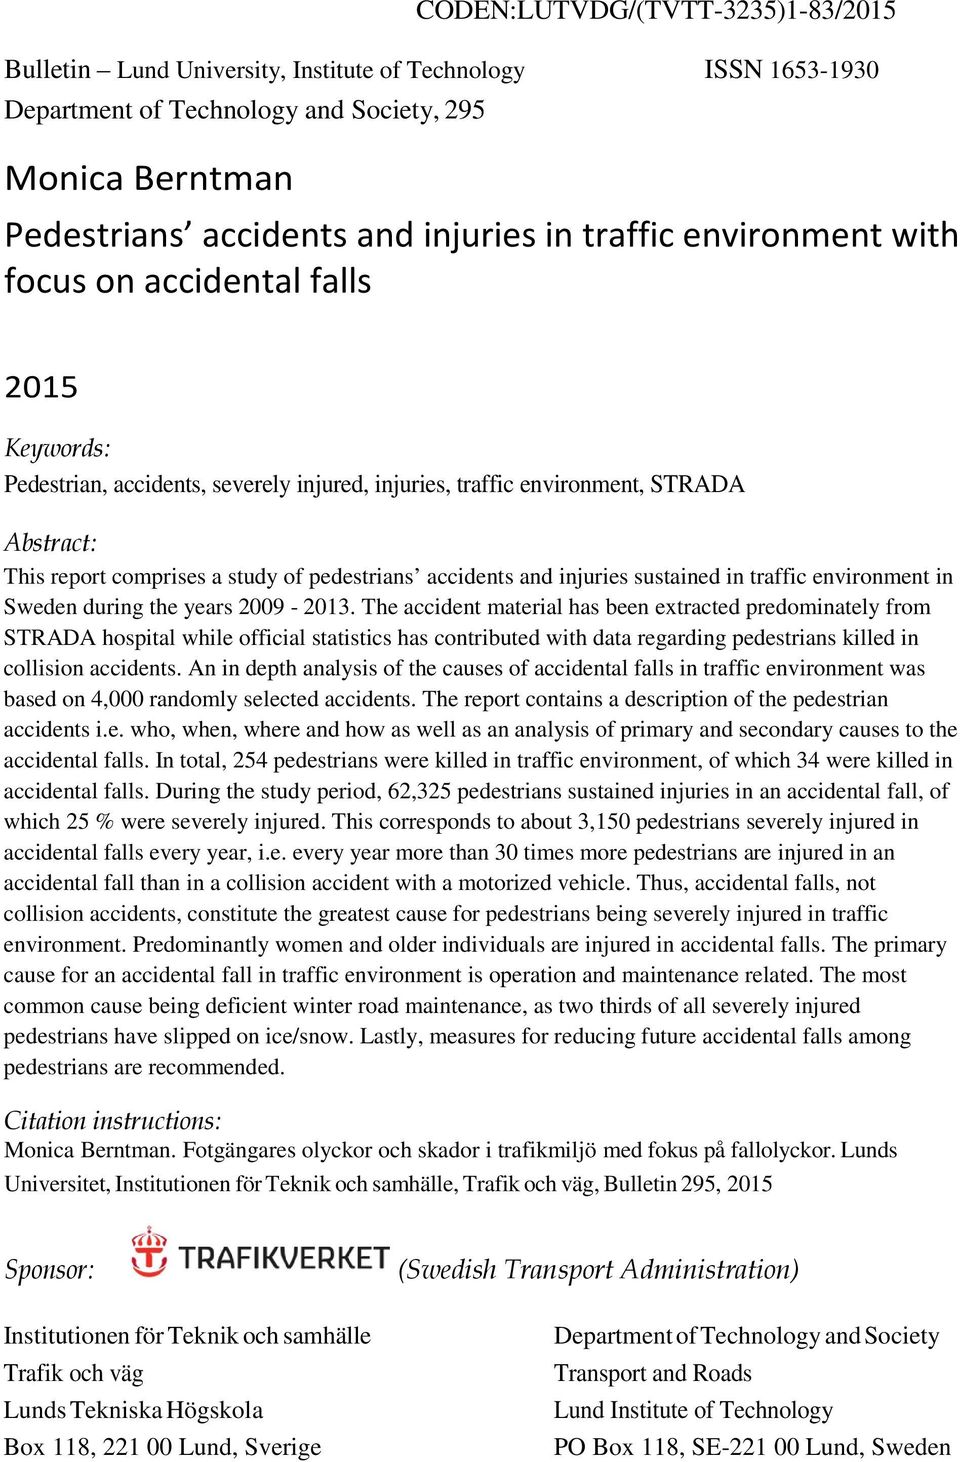 accidents and injuries sustained in traffic environment in Sweden during the years 2009-2013.